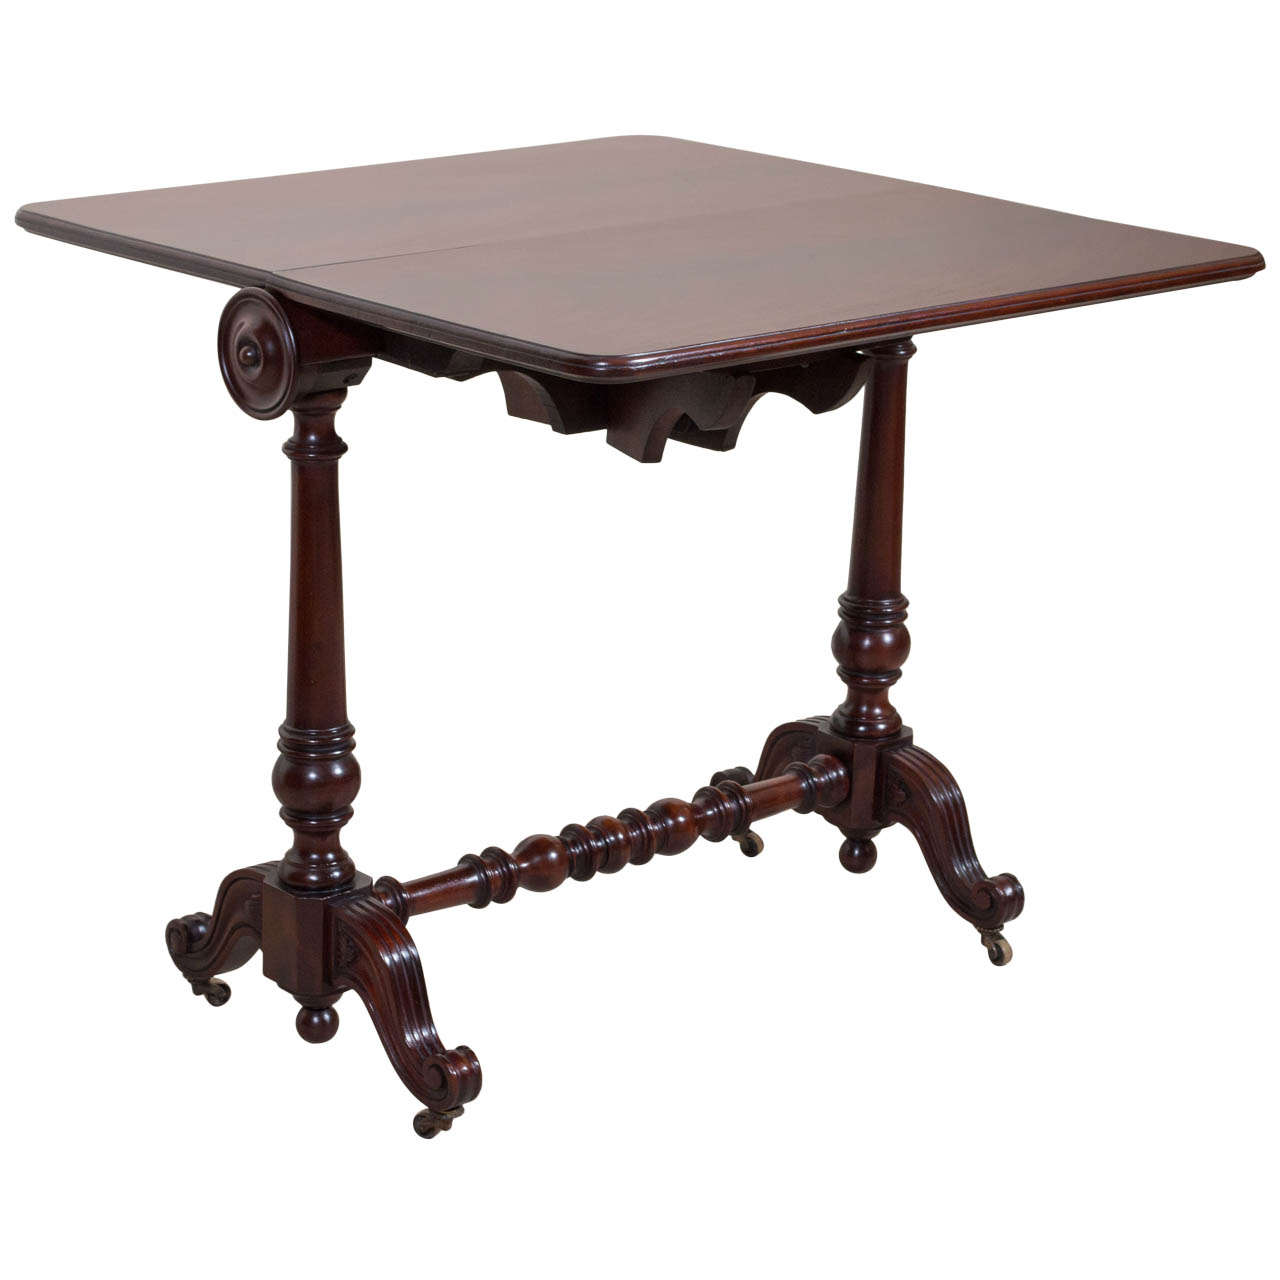 Victorian Flame Mahogany Leaf Lap Table - STORE CLOSING MAY 31ST For Sale